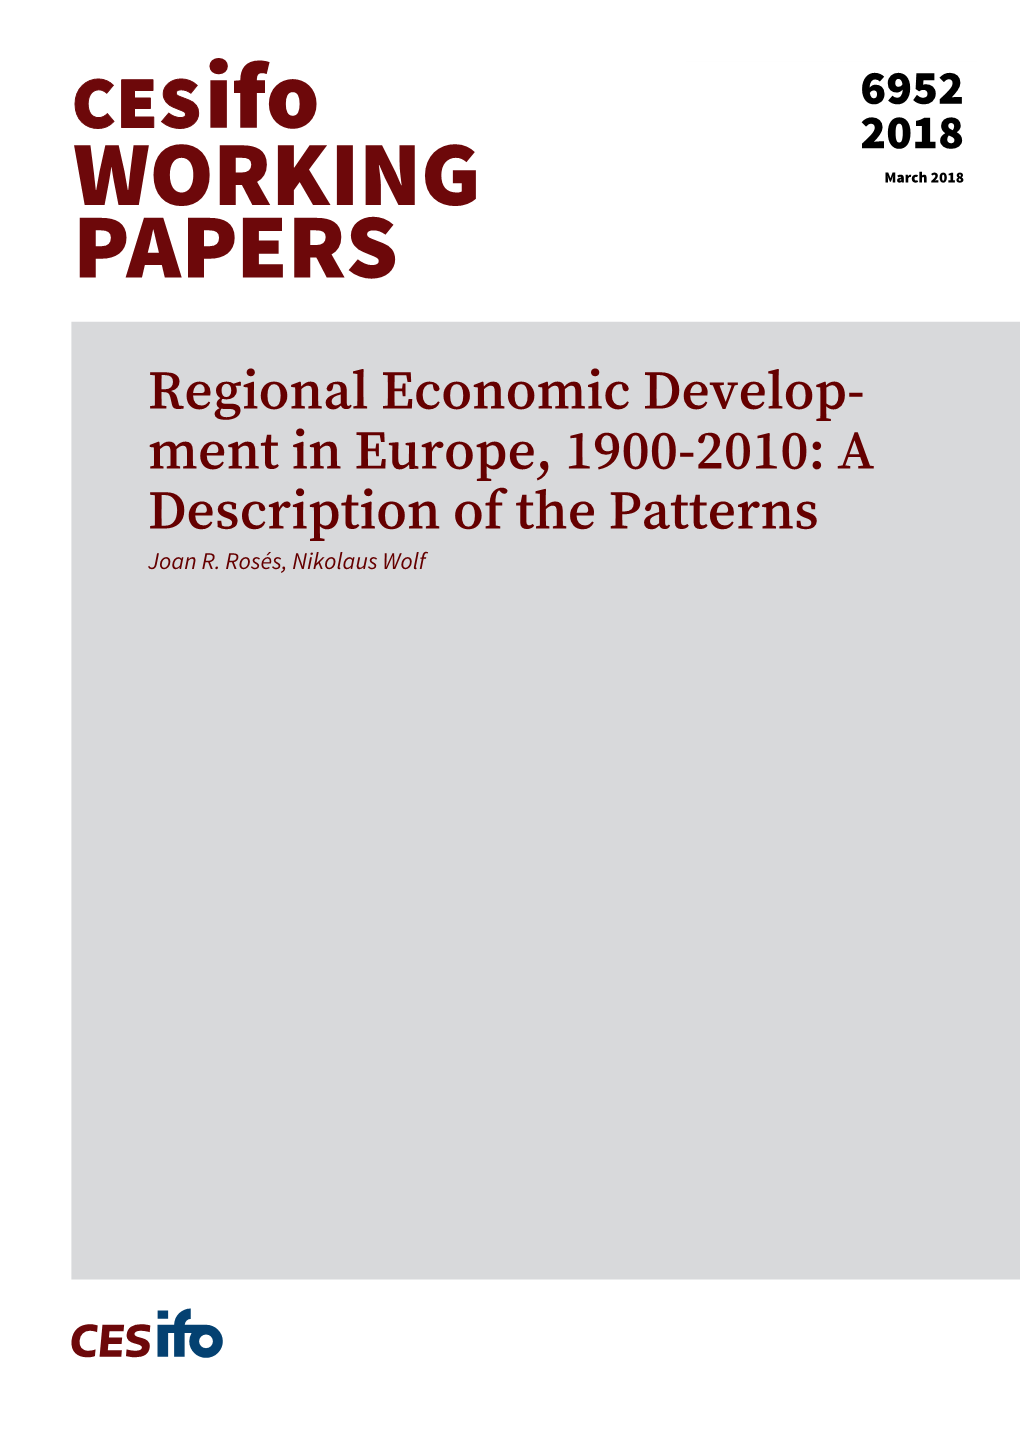 Cesifo Working Paper No. 6952 Category 6: Fiscal Policy, Macroeconomics and Growth